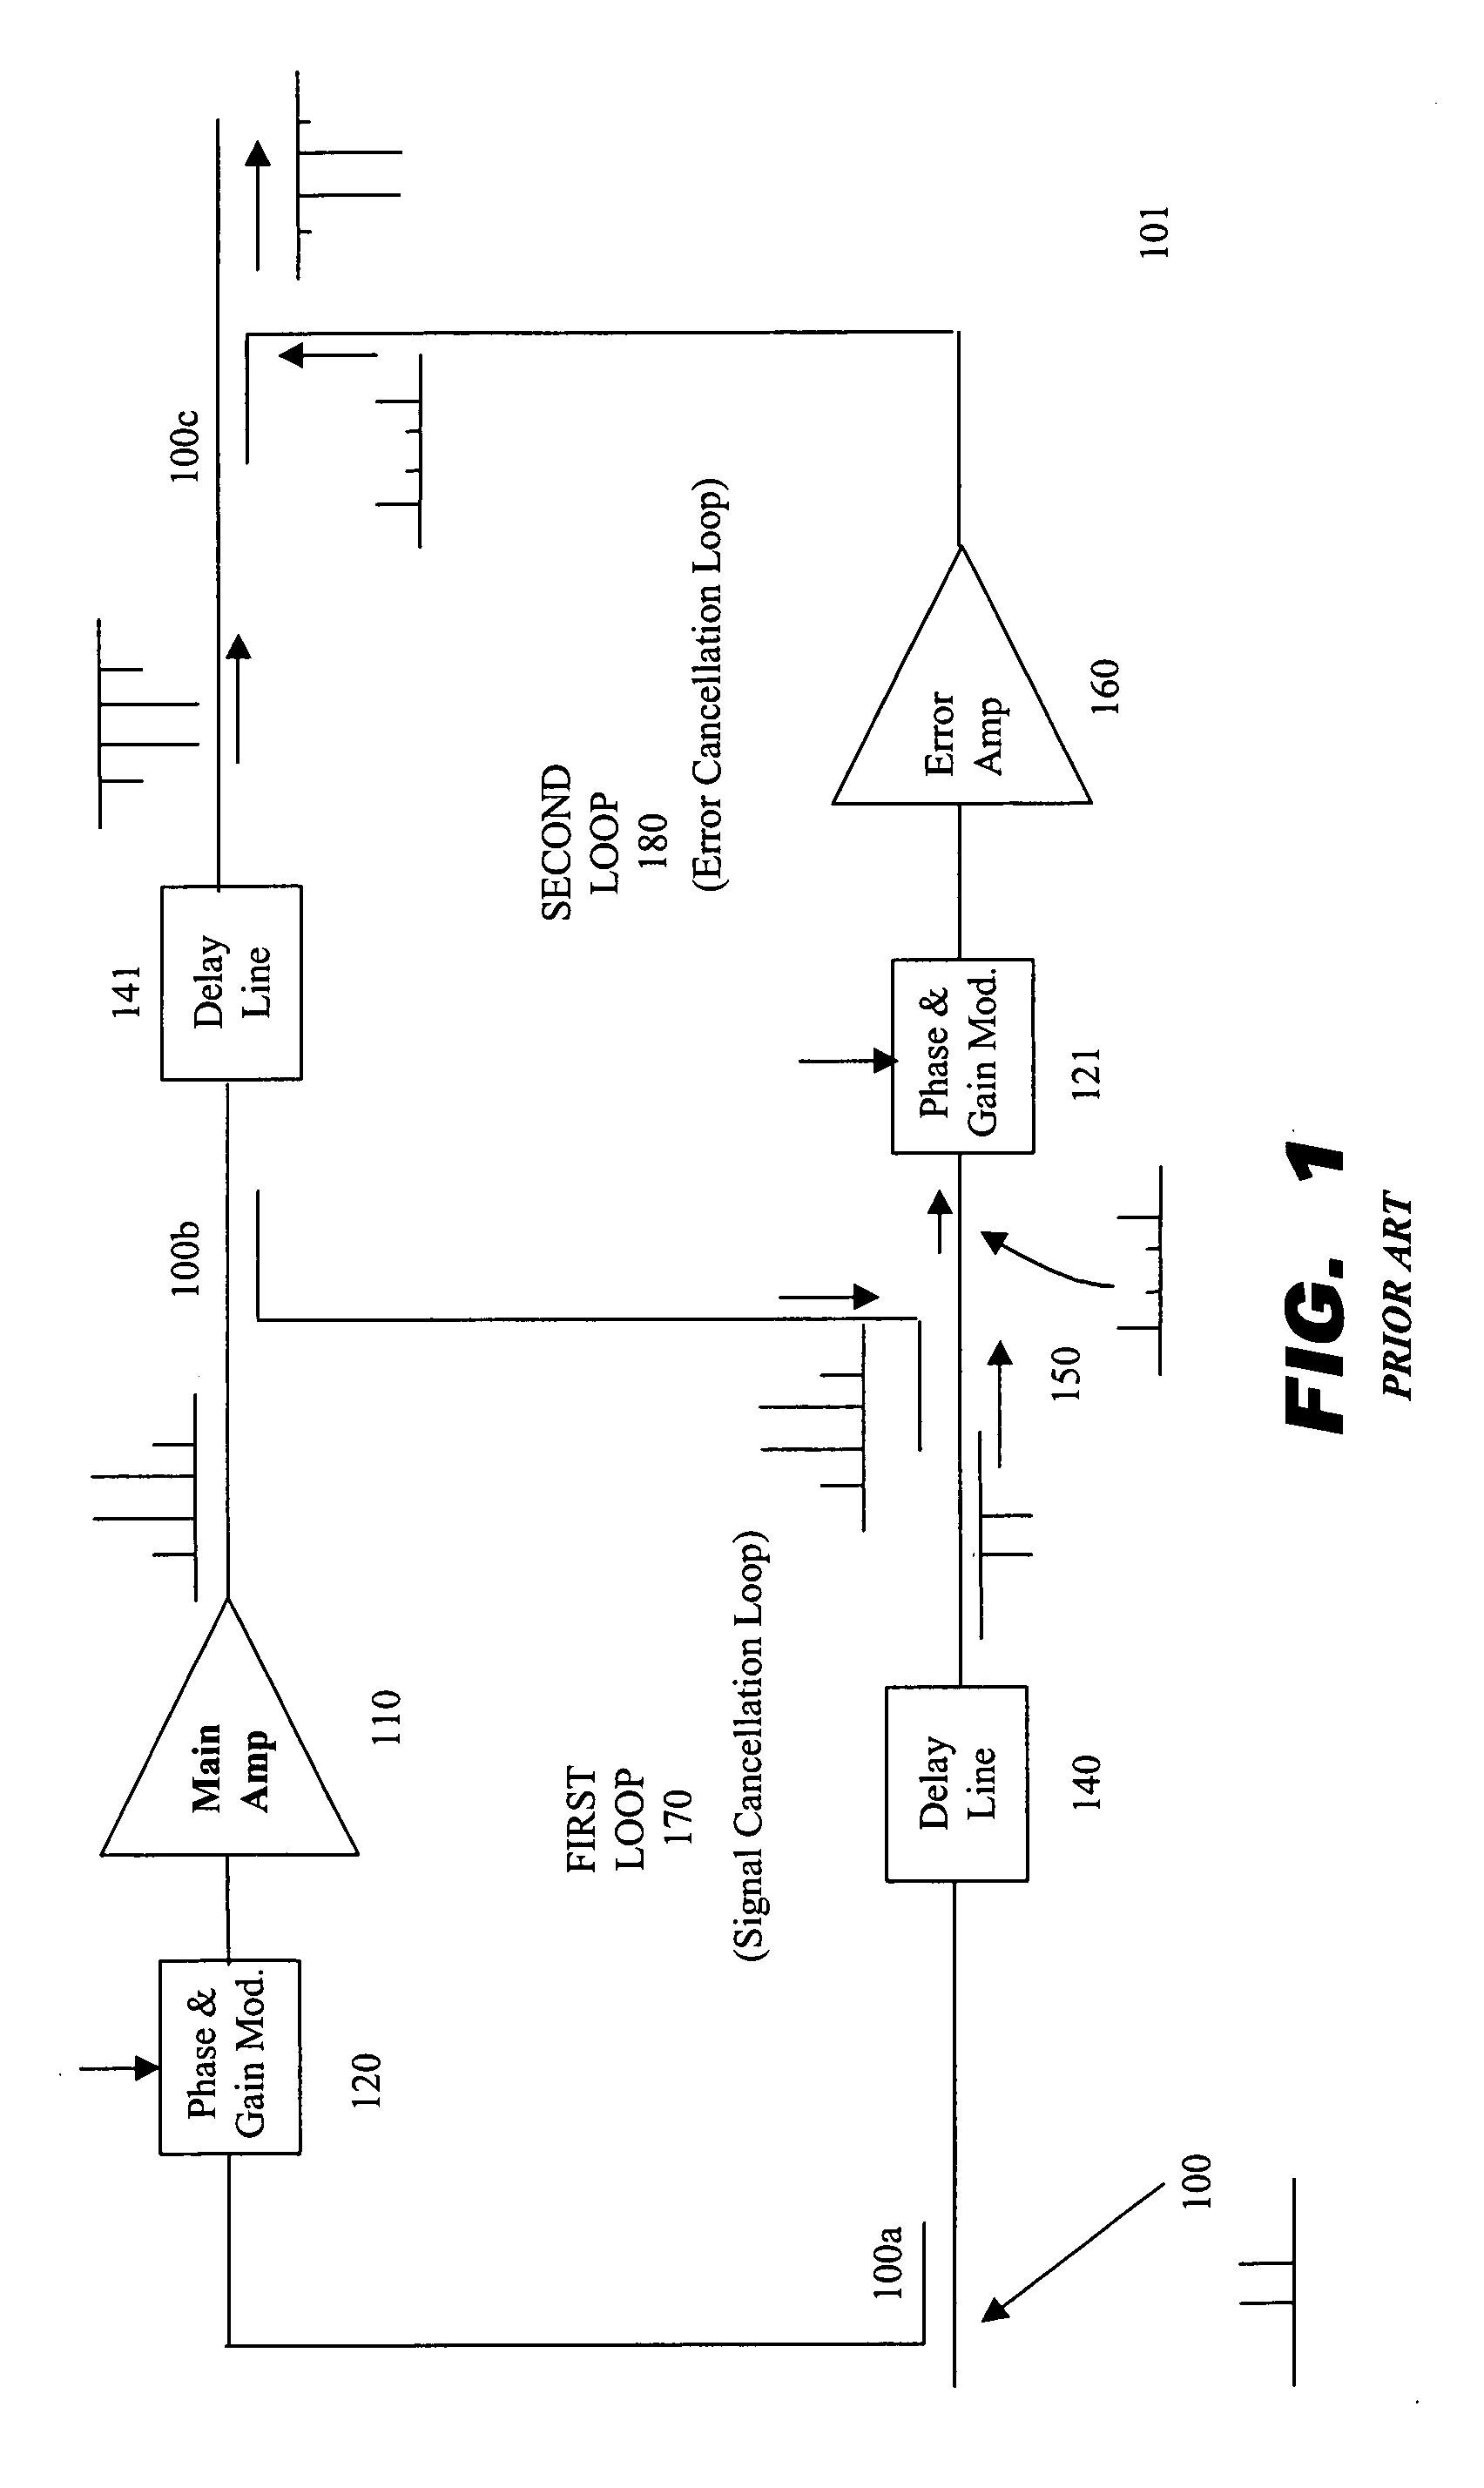 System and method of carrier reinjection in a feedforward amplifier